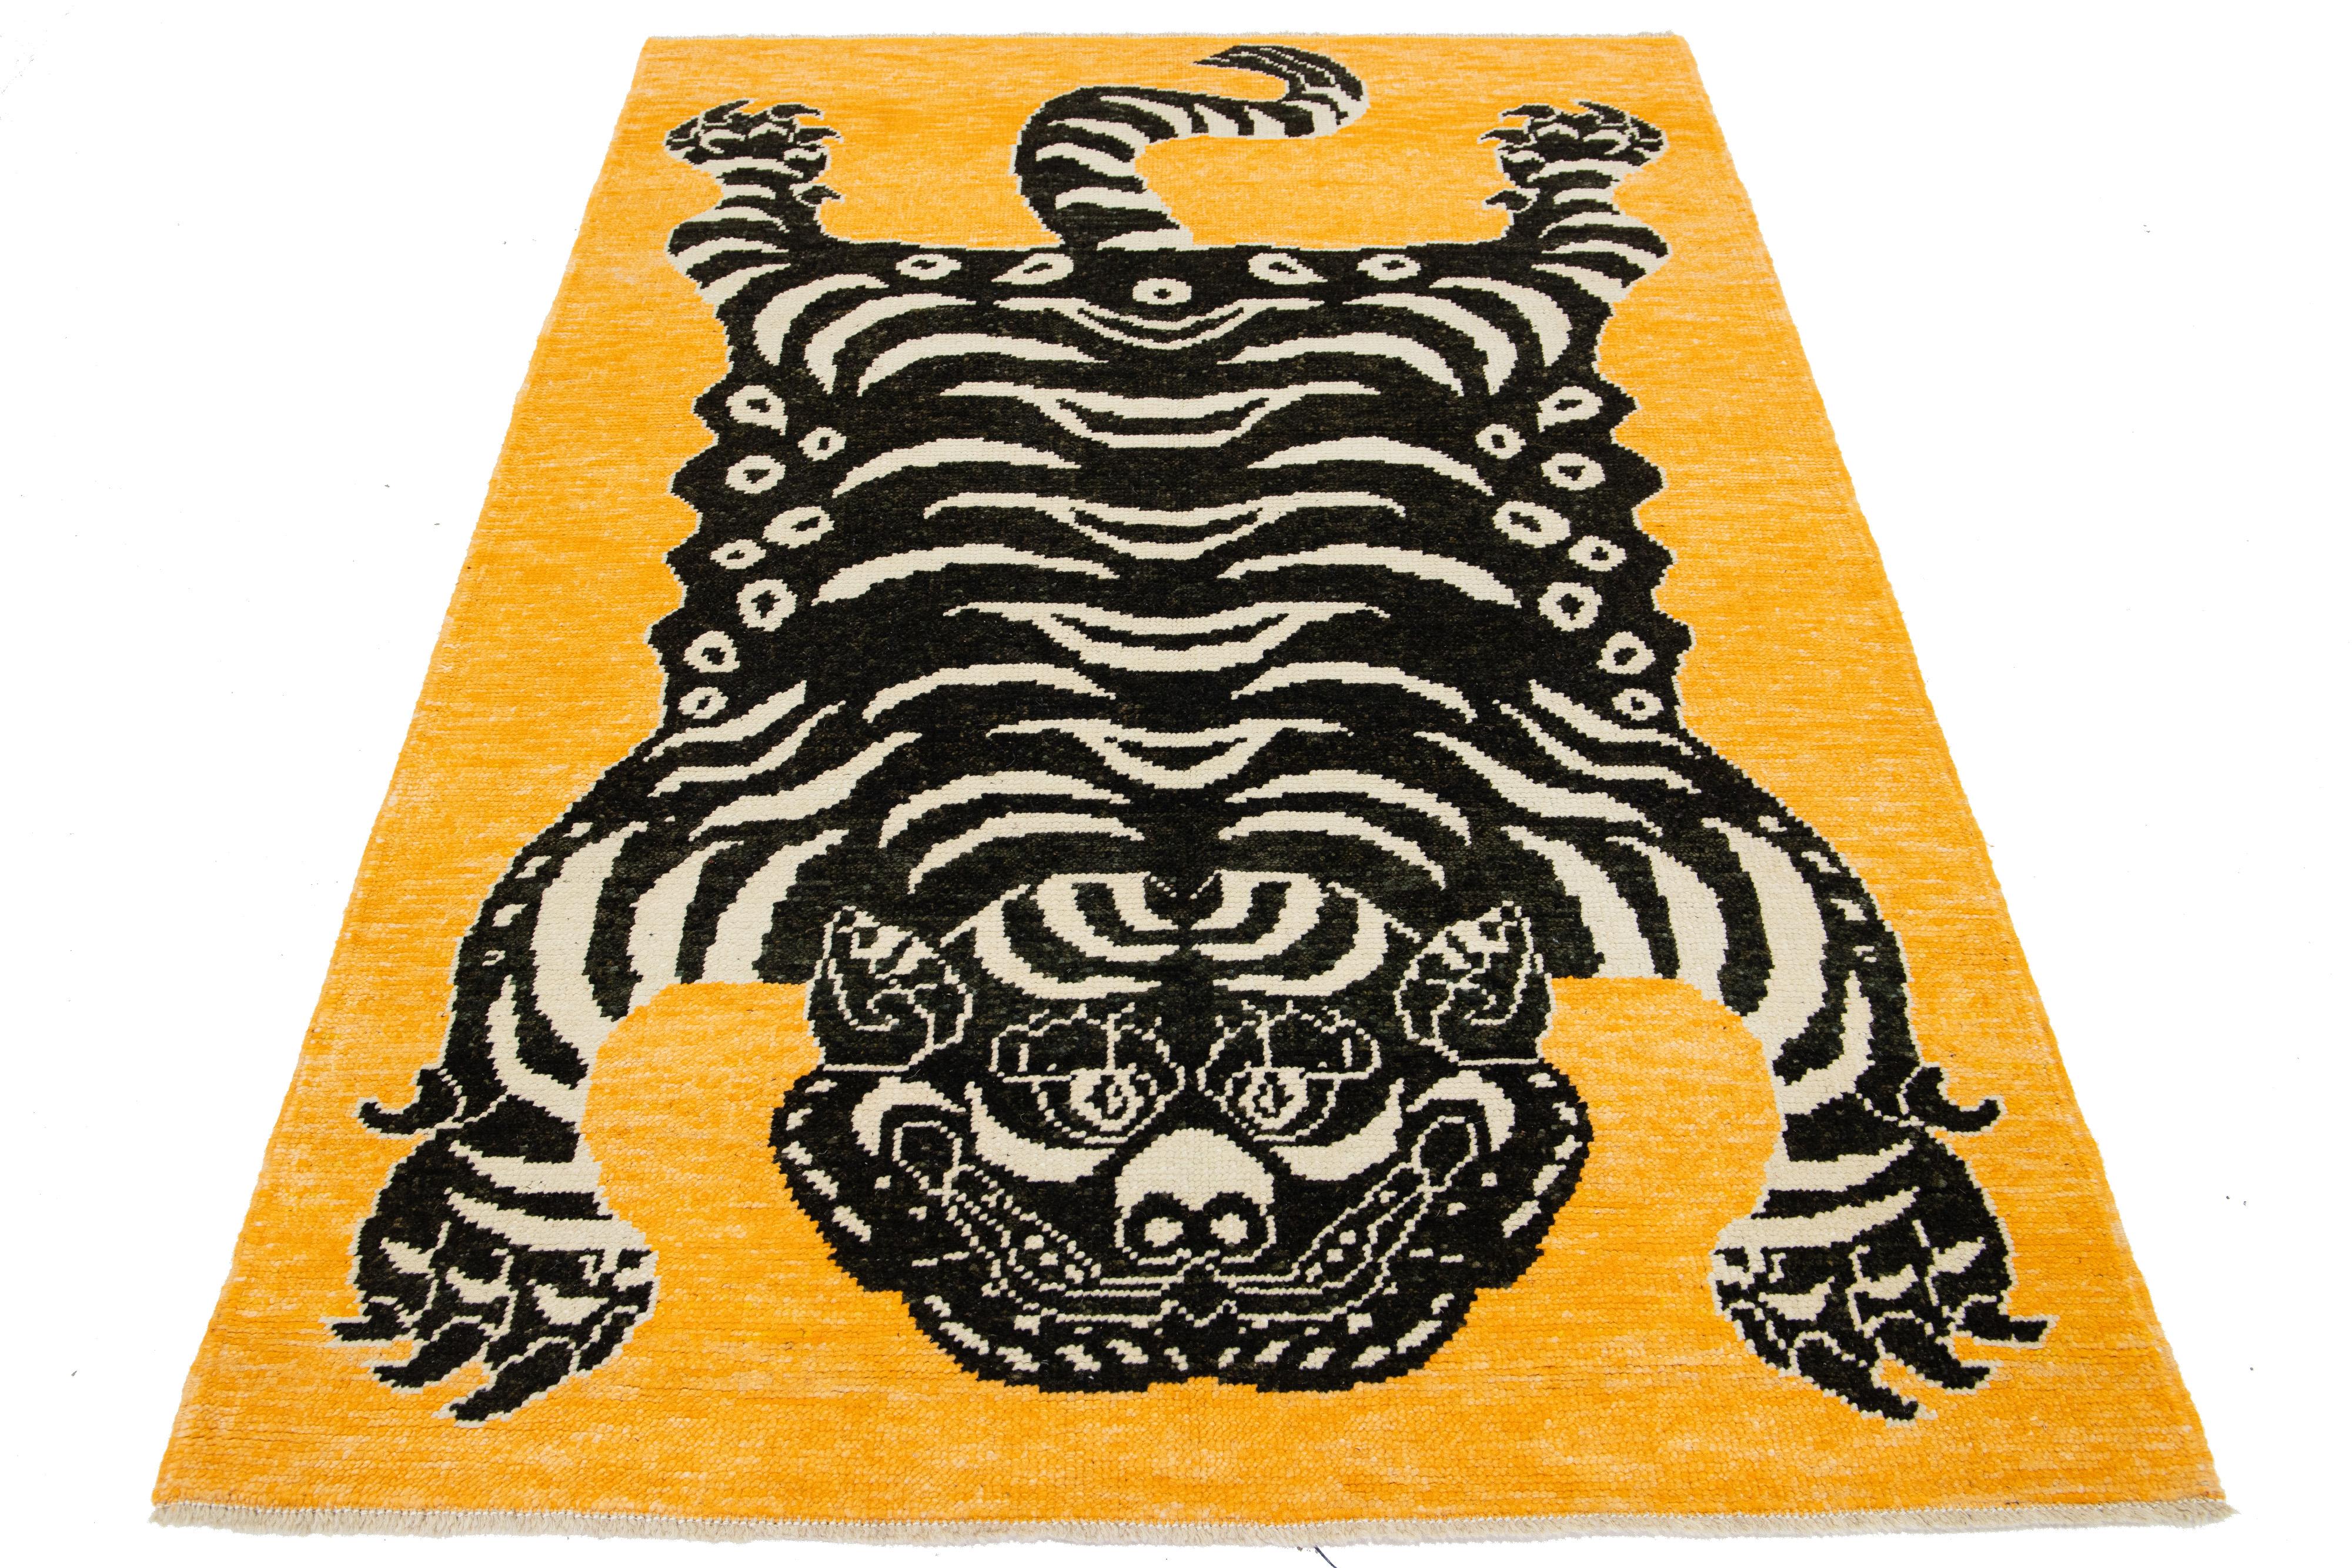 This beautiful Turkish Art Deco wool rug features a goldenrod color field, with accent colors in black and beige, and a stunning tiger pictorial design.

This rug measures 4'9